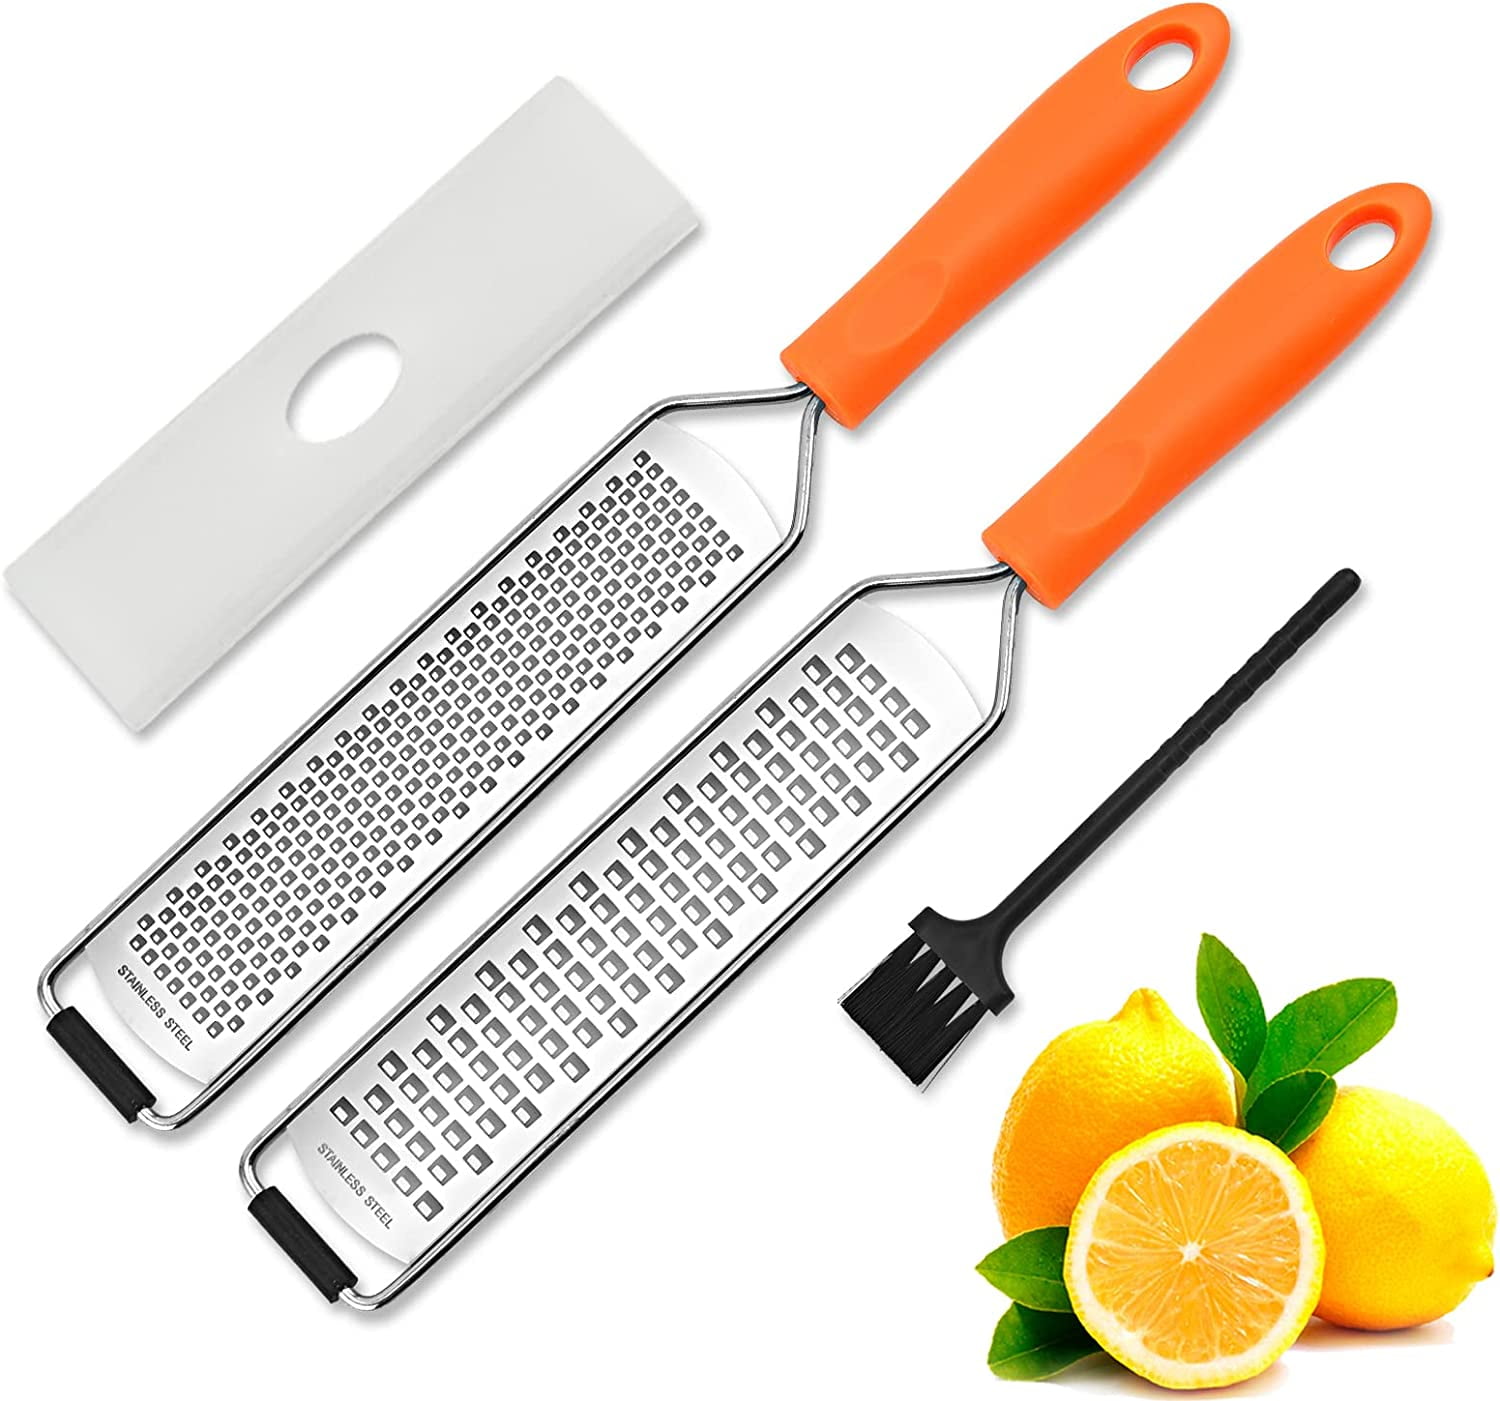  OpenSeseme Handheld Professional Kitchen Grater for Vegetables  and Cheese, Citrus Lemon Zester with Vegetable Peeler (Pink): Home & Kitchen